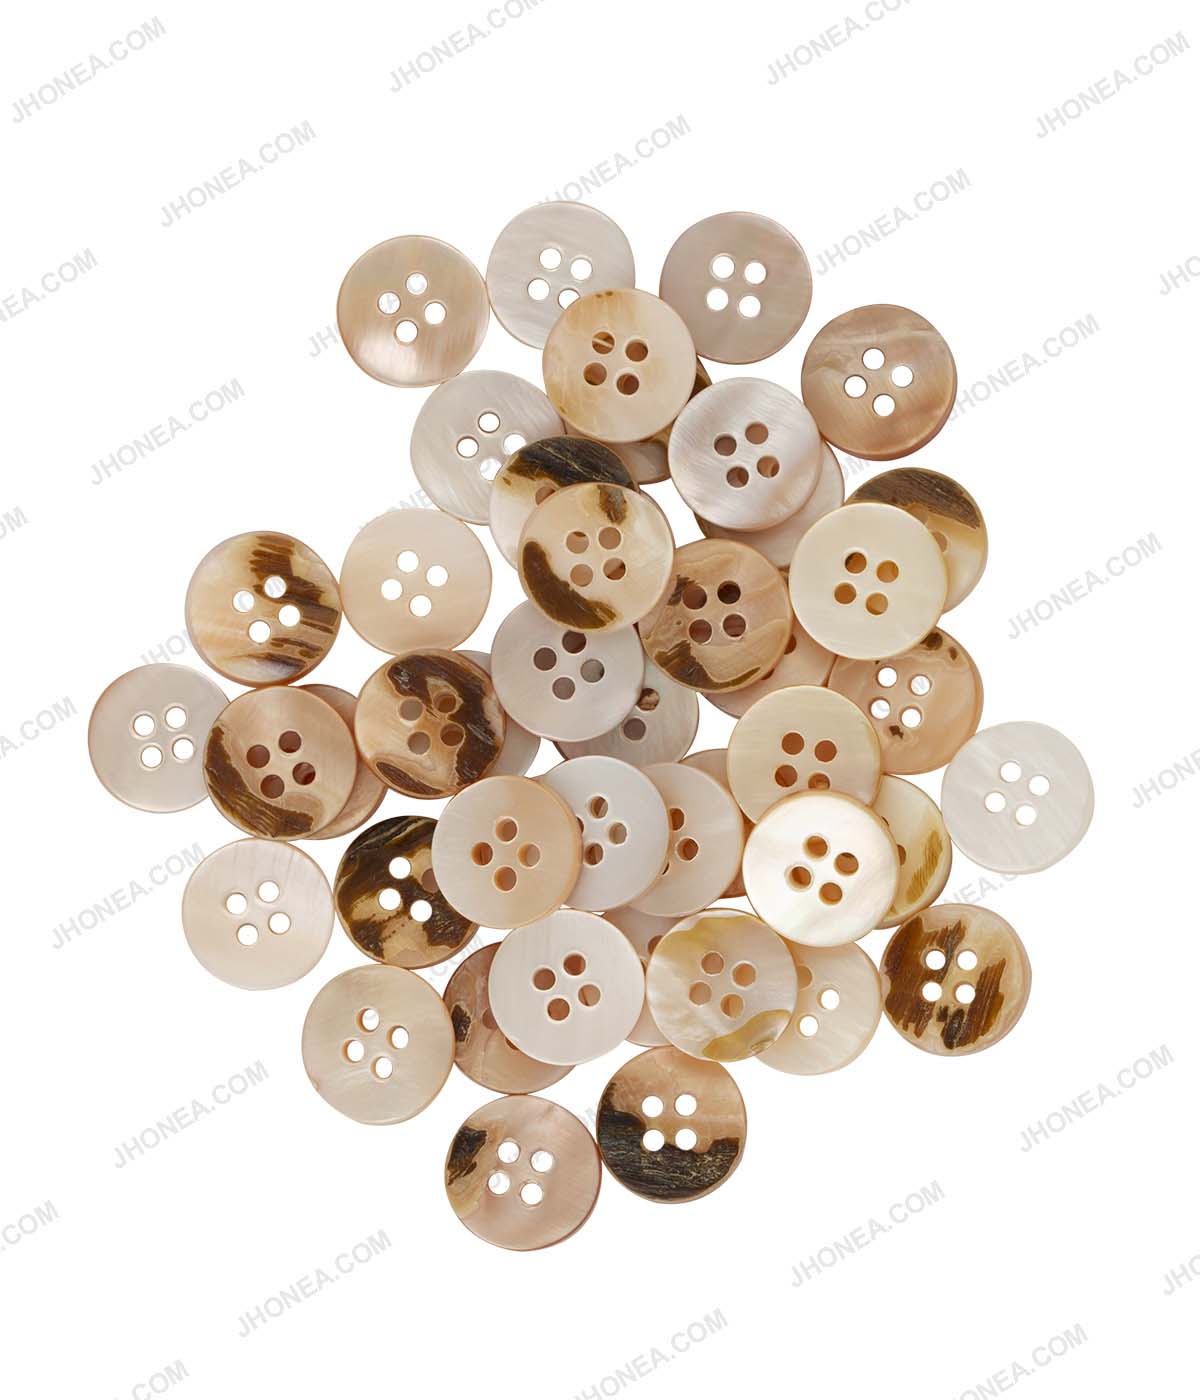 Glossy & Shiny Pearlescent Off White Shirt Buttons